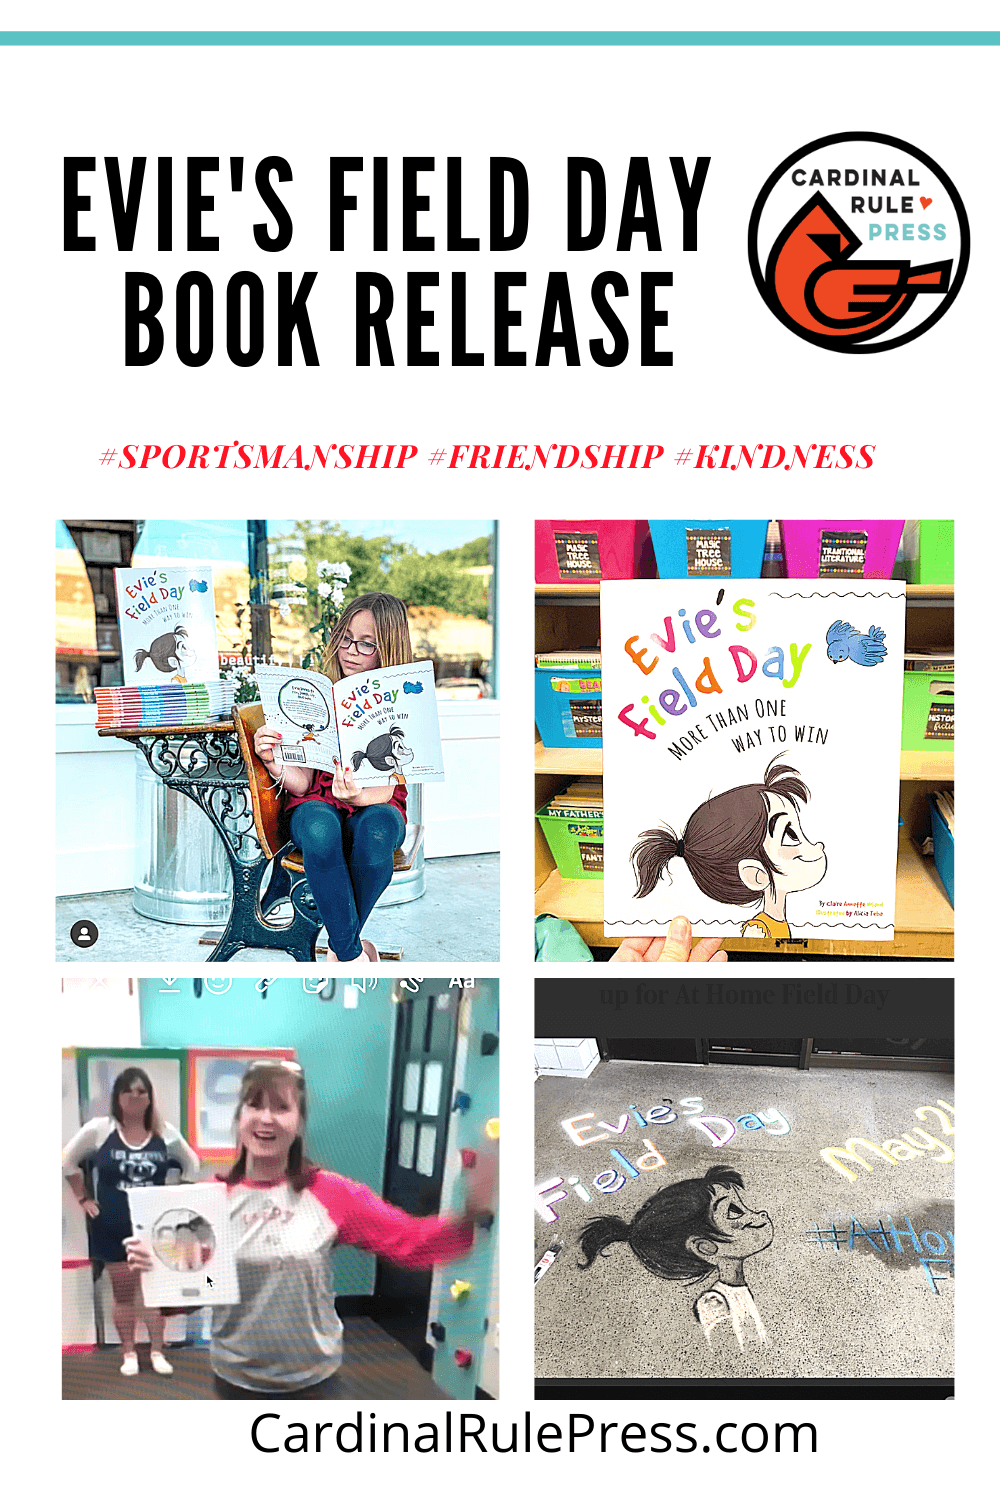 Evie's Field Day Book Release-In May 2020, we released a new book into the world by Claire Annette Noland and illustrated by Alicia Teba. The book is called Evie's Field Day: More Than One Way to Win.
#BookRelease #BookLAunch #BooksToRead #BooksWorthReading #AtHomeFieldDay #Sportsmanship #PictureBooks #ChildrensBooks